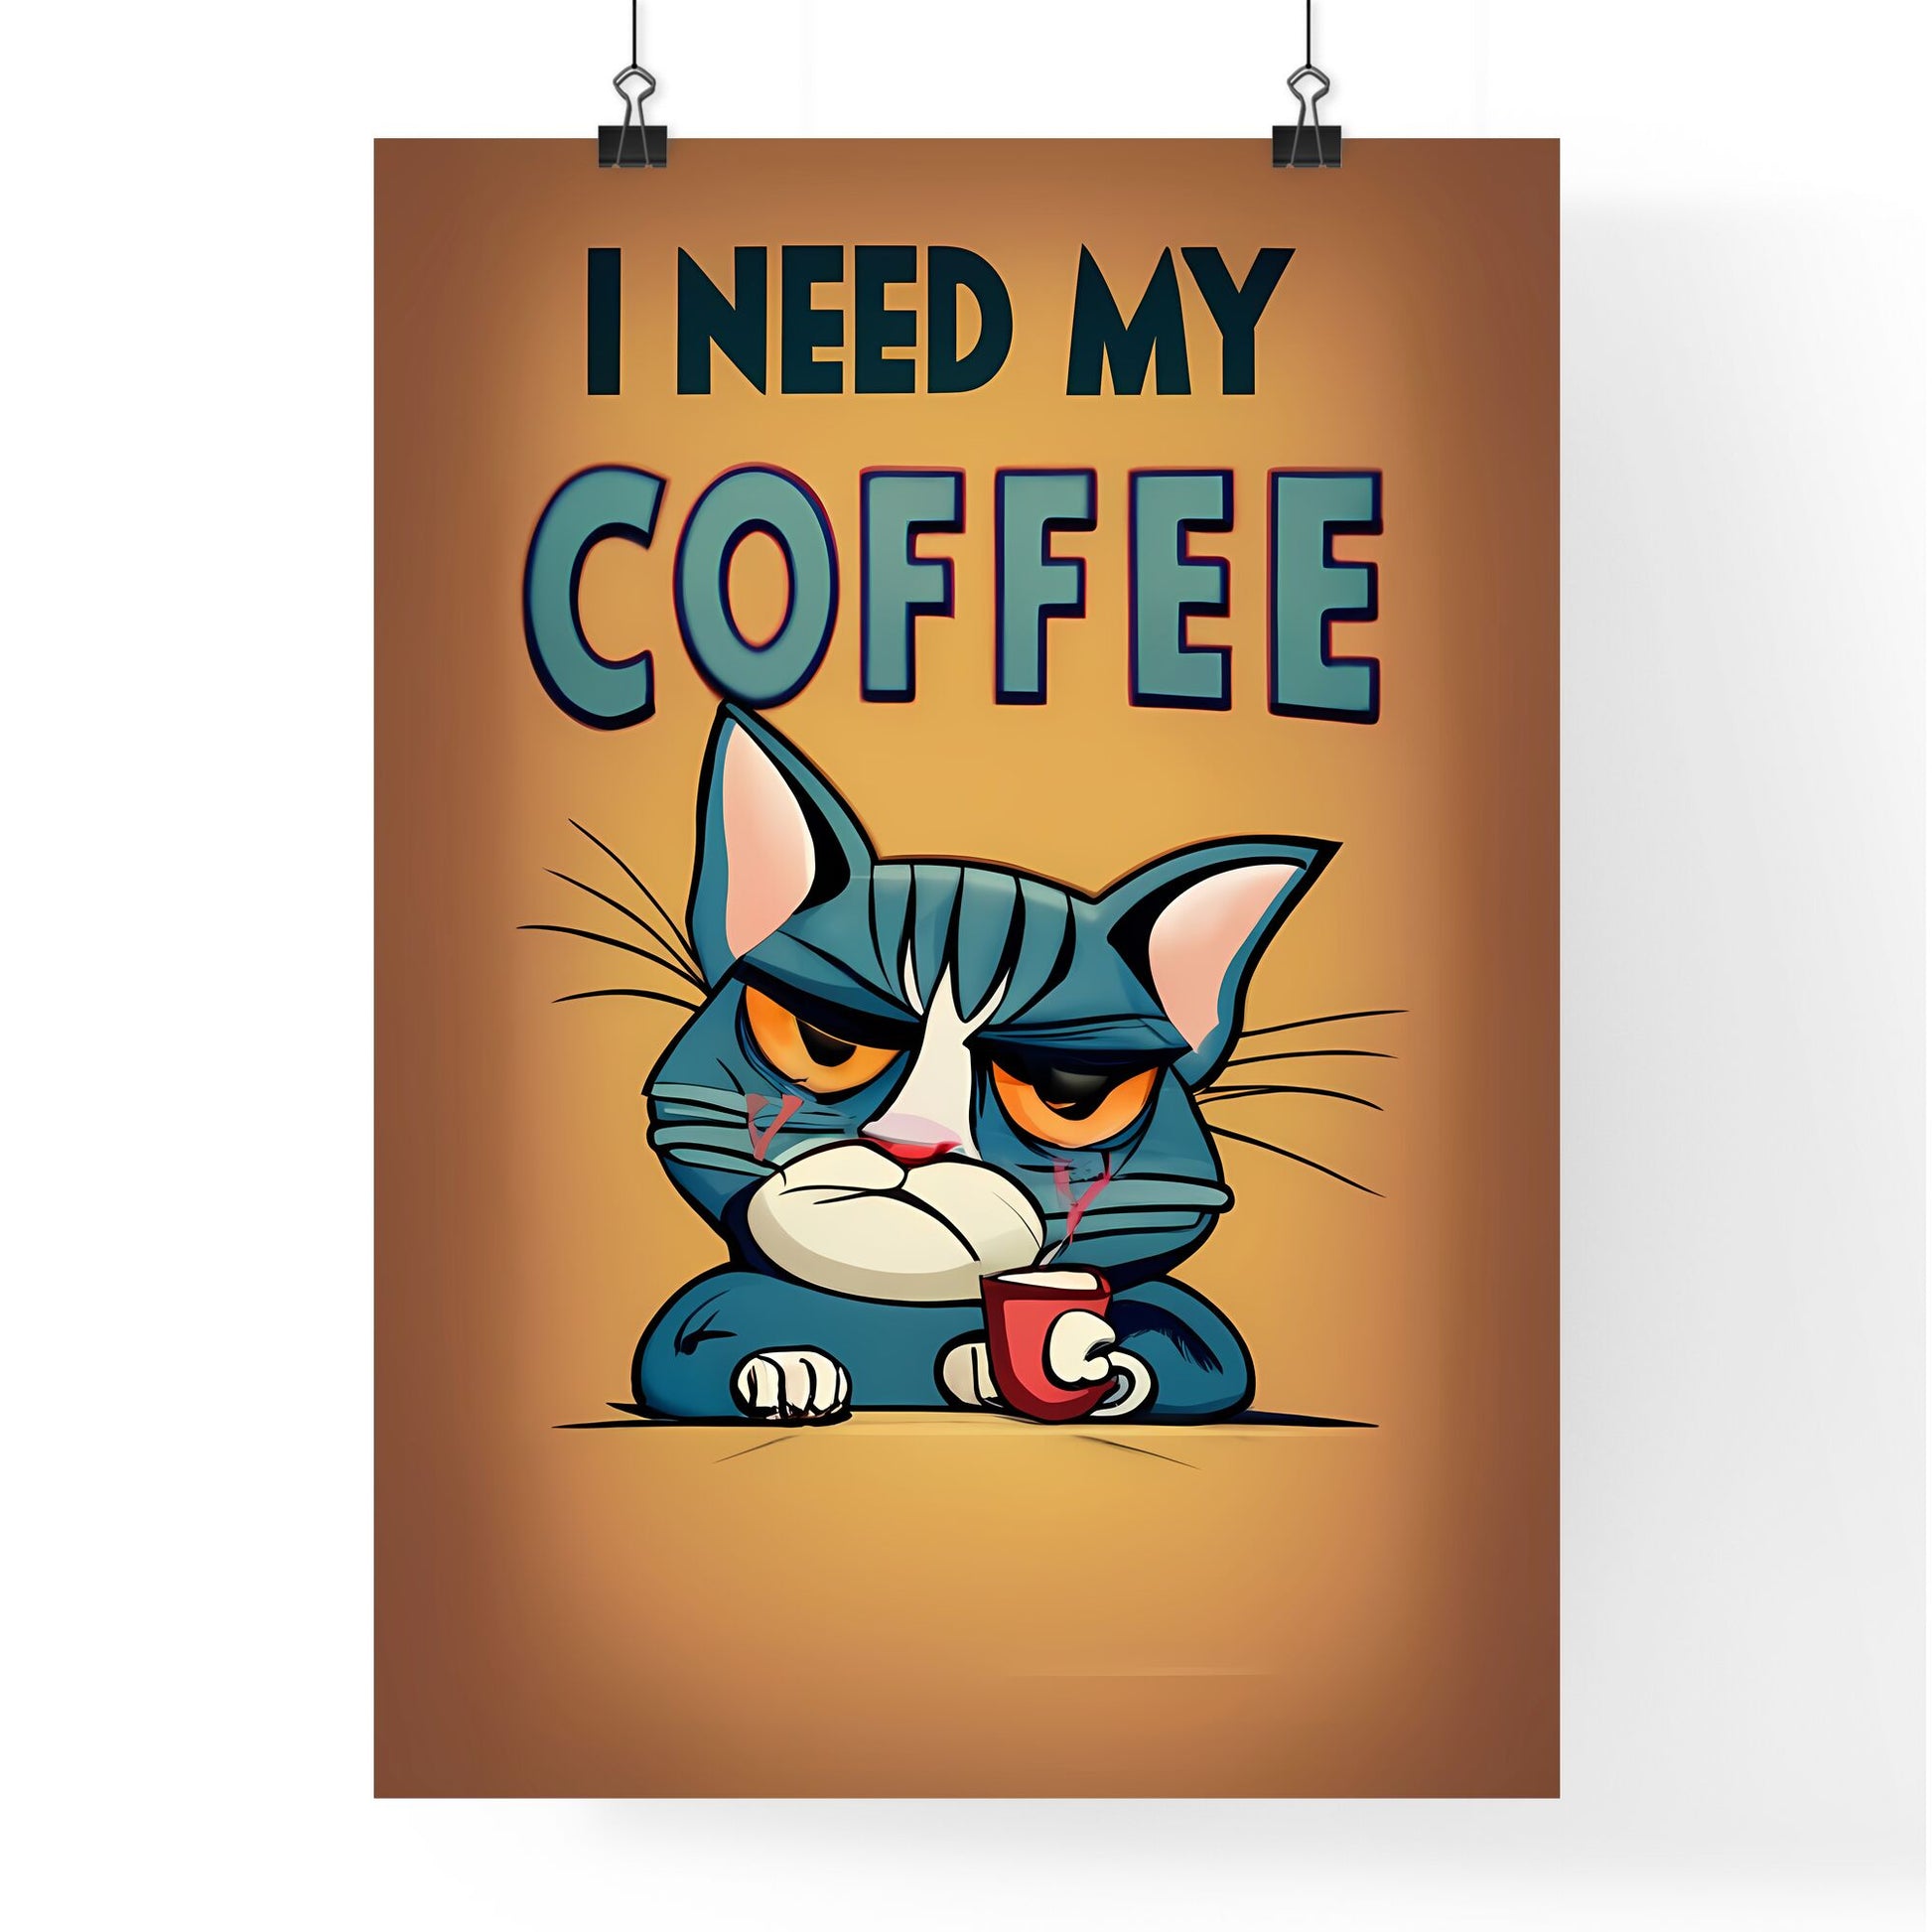 I Need My Coffee - A Cartoon Of A Cat Holding A Cup Of Coffee Art Print Default Title